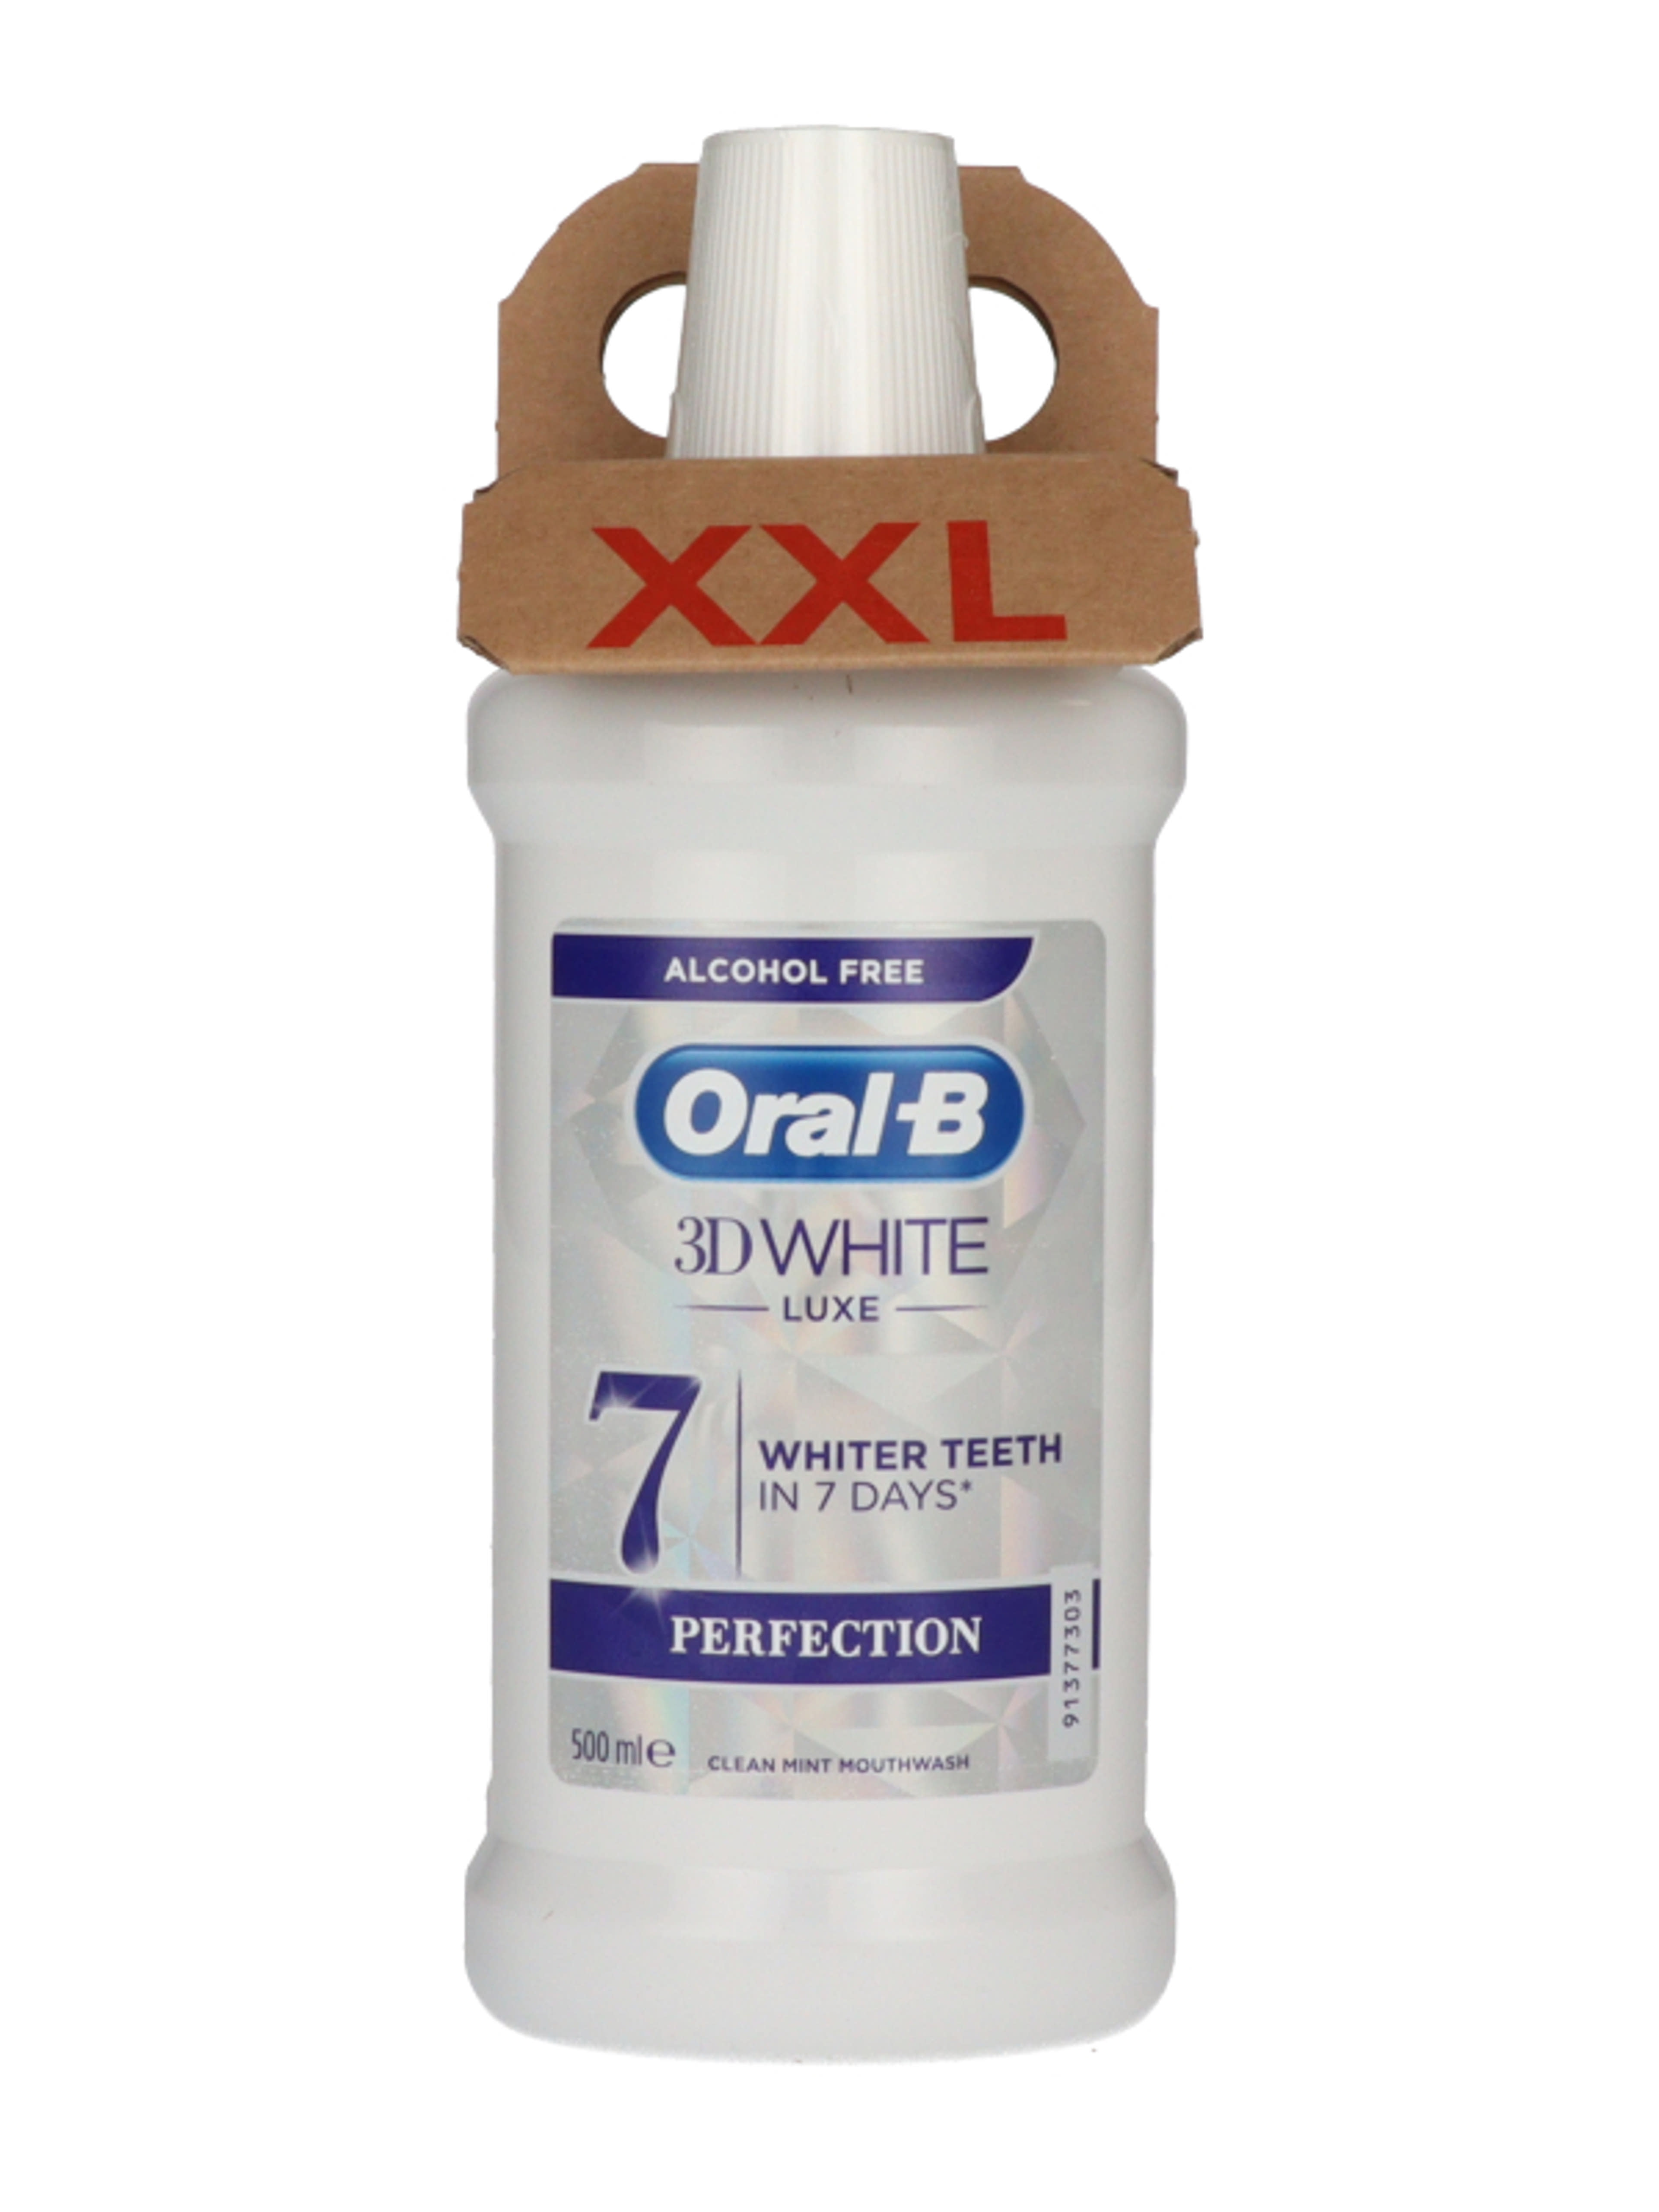 Oral-B 3D White Luxe Protection szájvíz duopack - 1000 ml-2